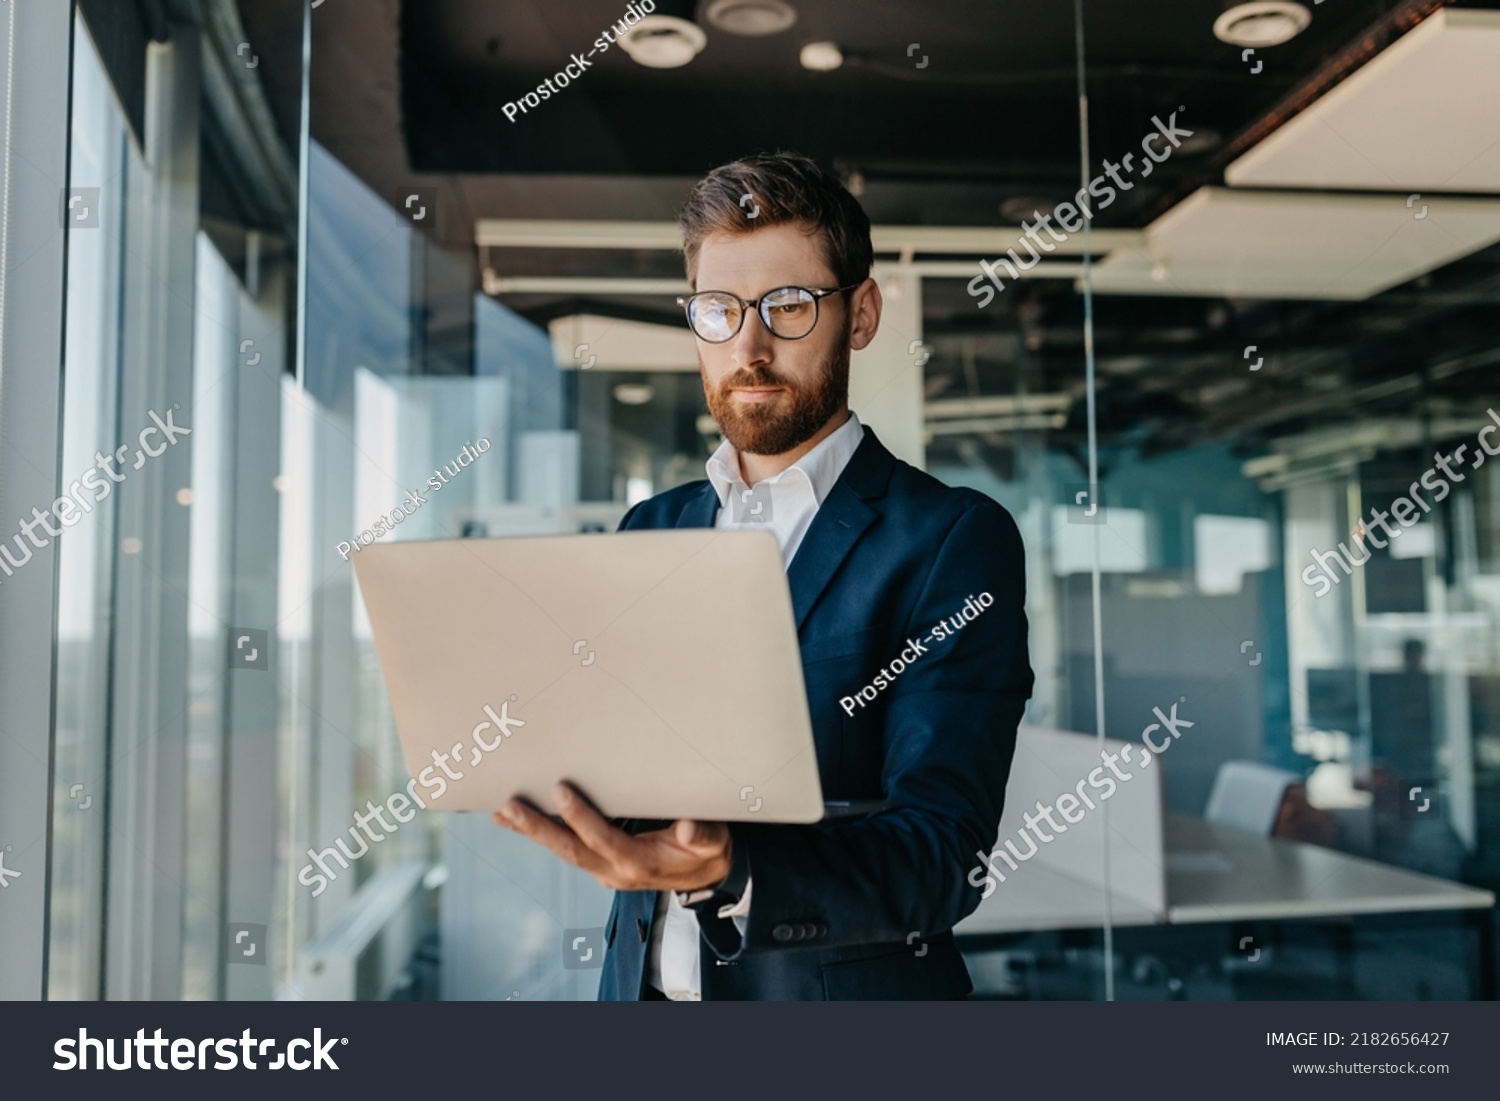 Business person. Successful middle aged businessman with laptop in hands standing in modern office interior. Serious male entrepreneur in formal suit working on computer #2182656427